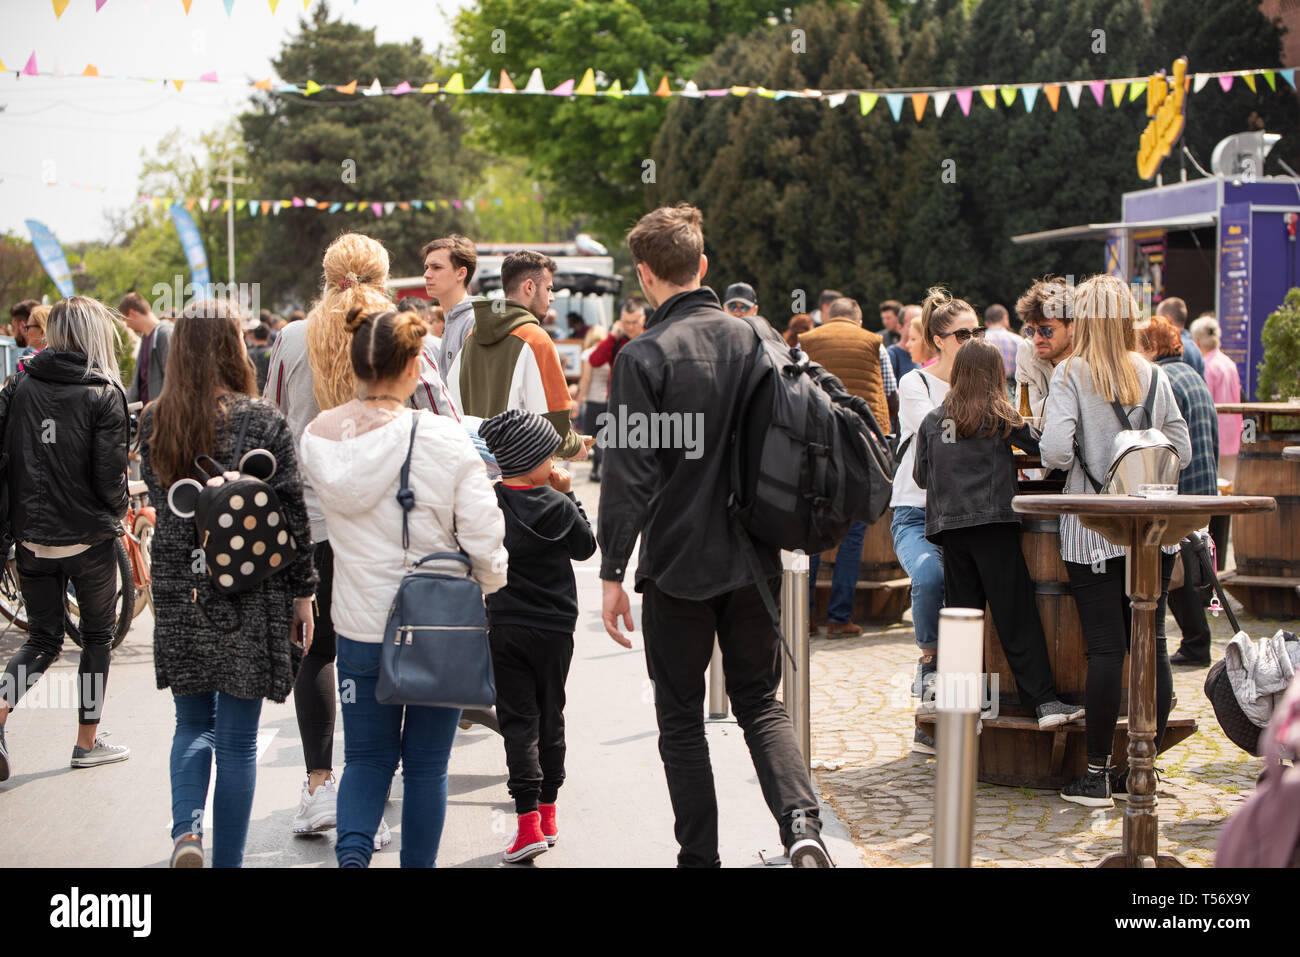 Bucharest, Romania: 21.04.2019 - Street Food Truck festival. Close up of people walking around at a street food festival in the search for the perfect lunch. Weekend outdoors activities Stock Photo